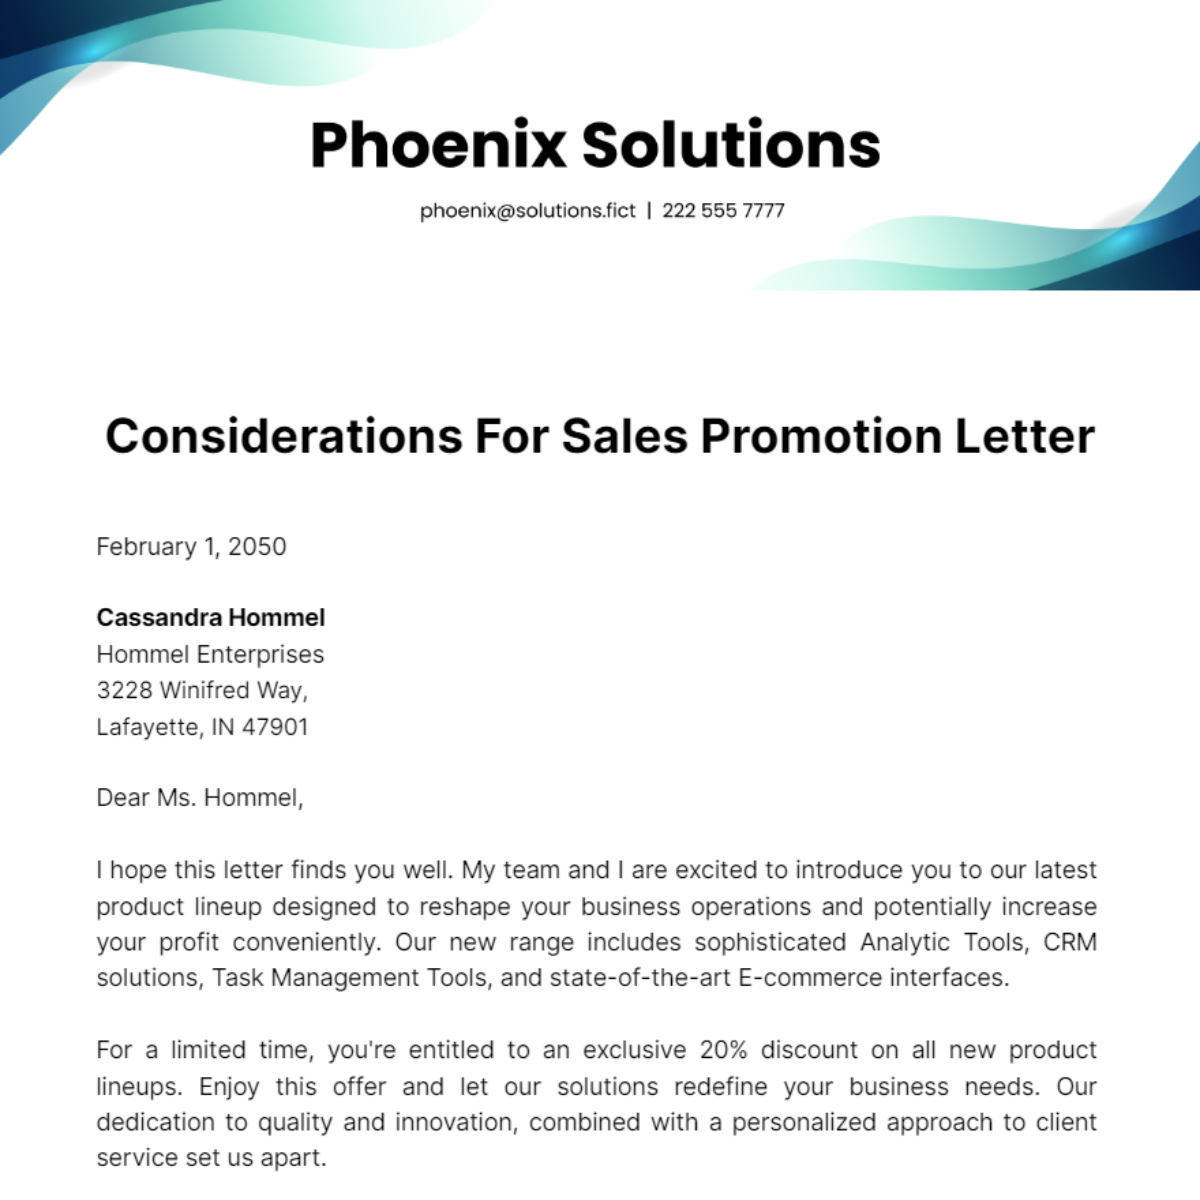 Free Considerations For Sales Promotion Letter Template